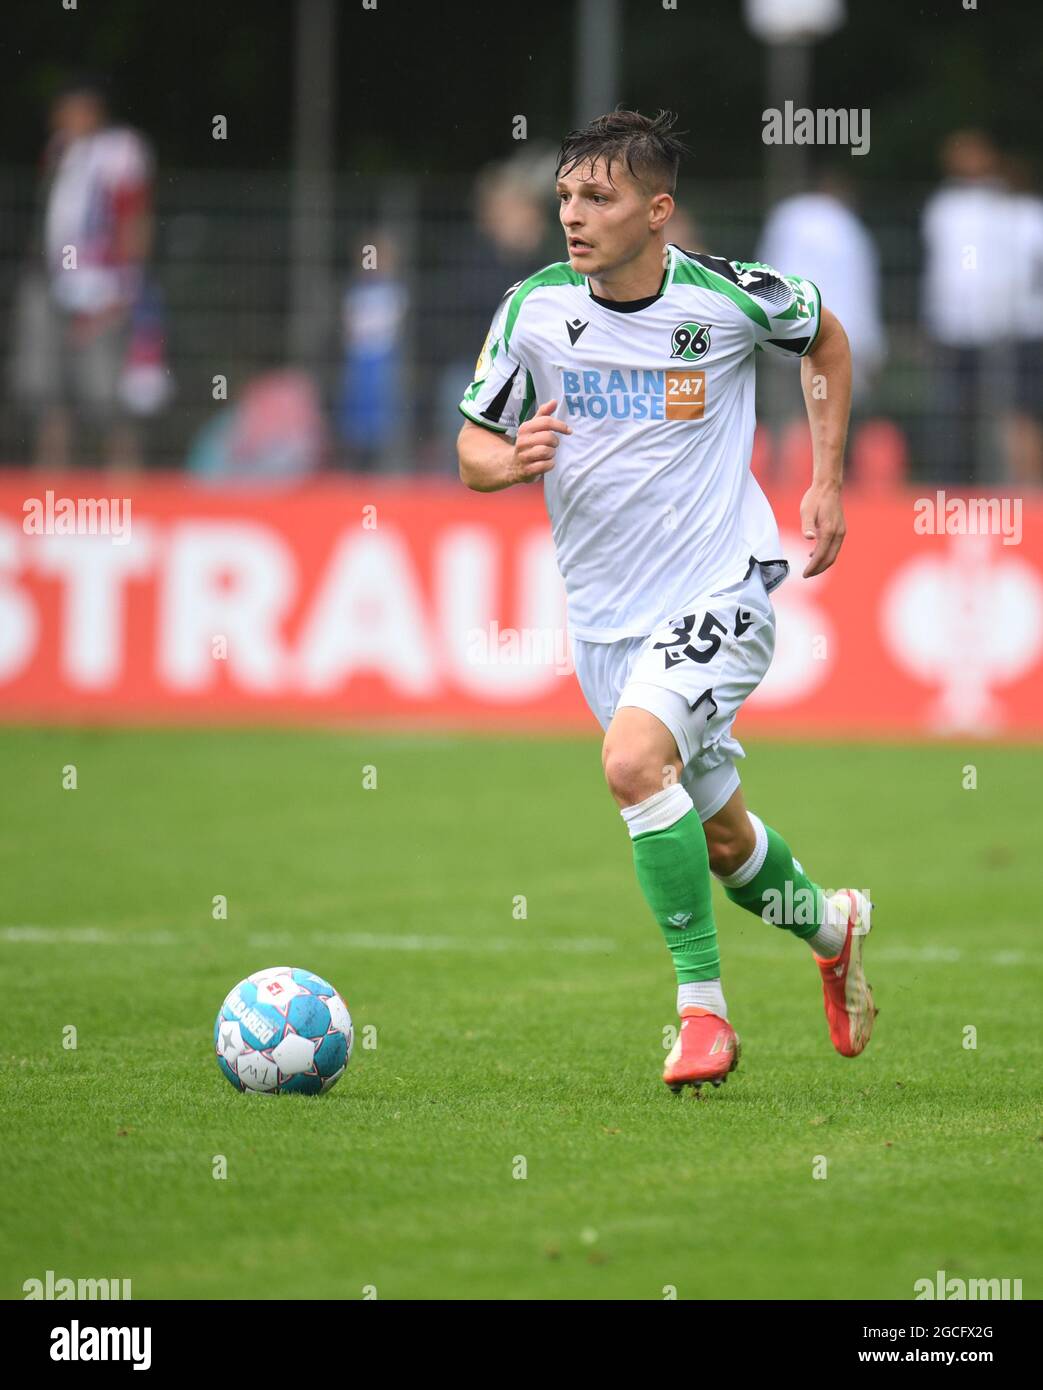 Norderstedt, Germany. 07th Aug, 2021. Football: DFB Cup, Eintracht Norderstedt - Hannover 96, 1st round at Edmund-Plambeck-Stadion. Hannover's Florent Muslija plays the ball. Credit: Daniel Reinhardt/dpa - IMPORTANT NOTE: In accordance with the regulations of the DFL Deutsche Fußball Liga and/or the DFB Deutscher Fußball-Bund, it is prohibited to use or have used photographs taken in the stadium and/or of the match in the form of sequence pictures and/or video-like photo series./dpa/Alamy Live News Stock Photo